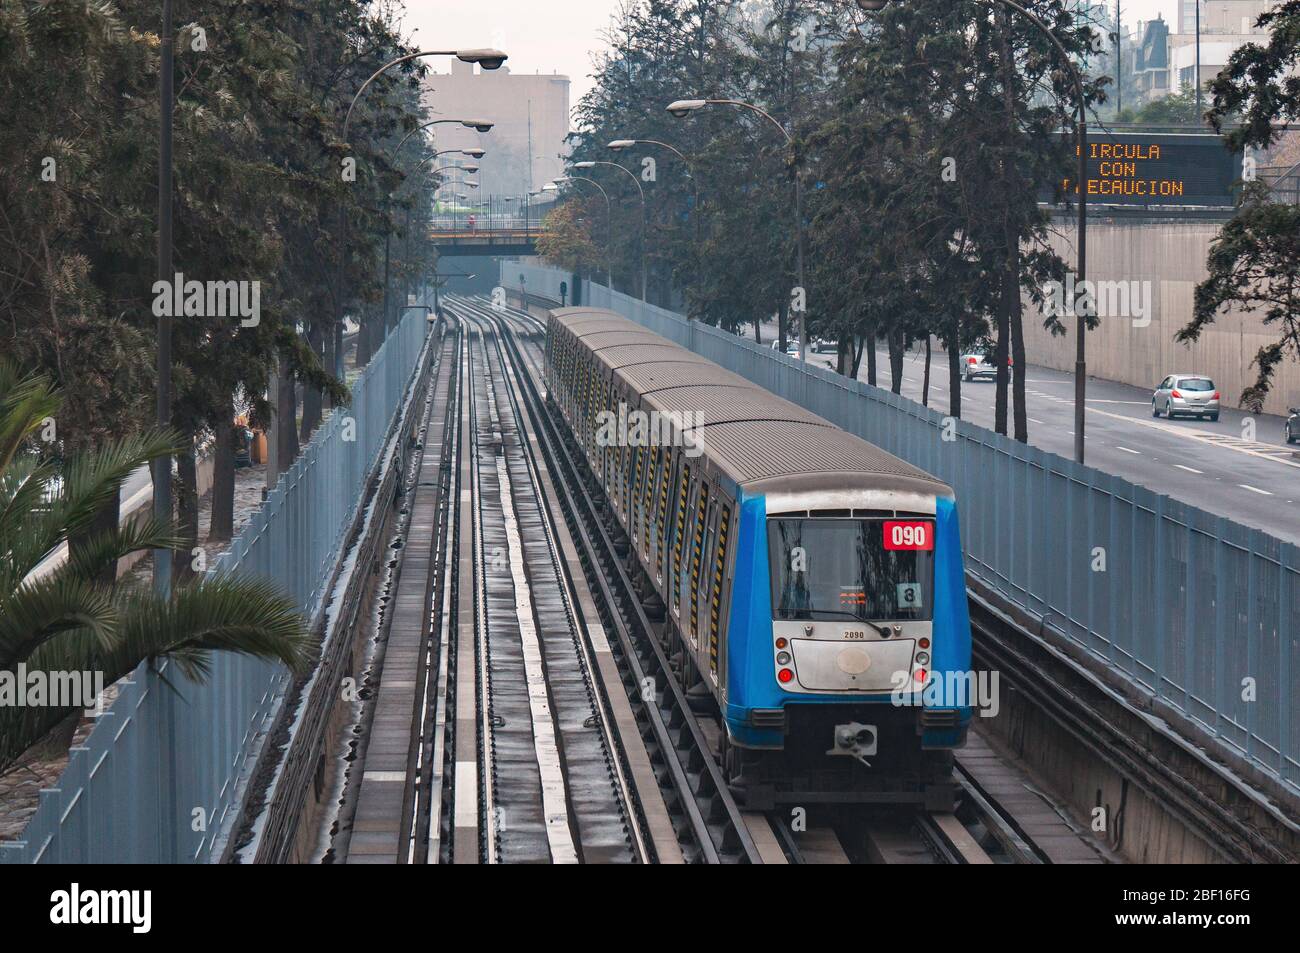 SANTIAGO, CHILE - MAY 2016: A Metro de Santiago train at a station of Line 2 Stock Photo